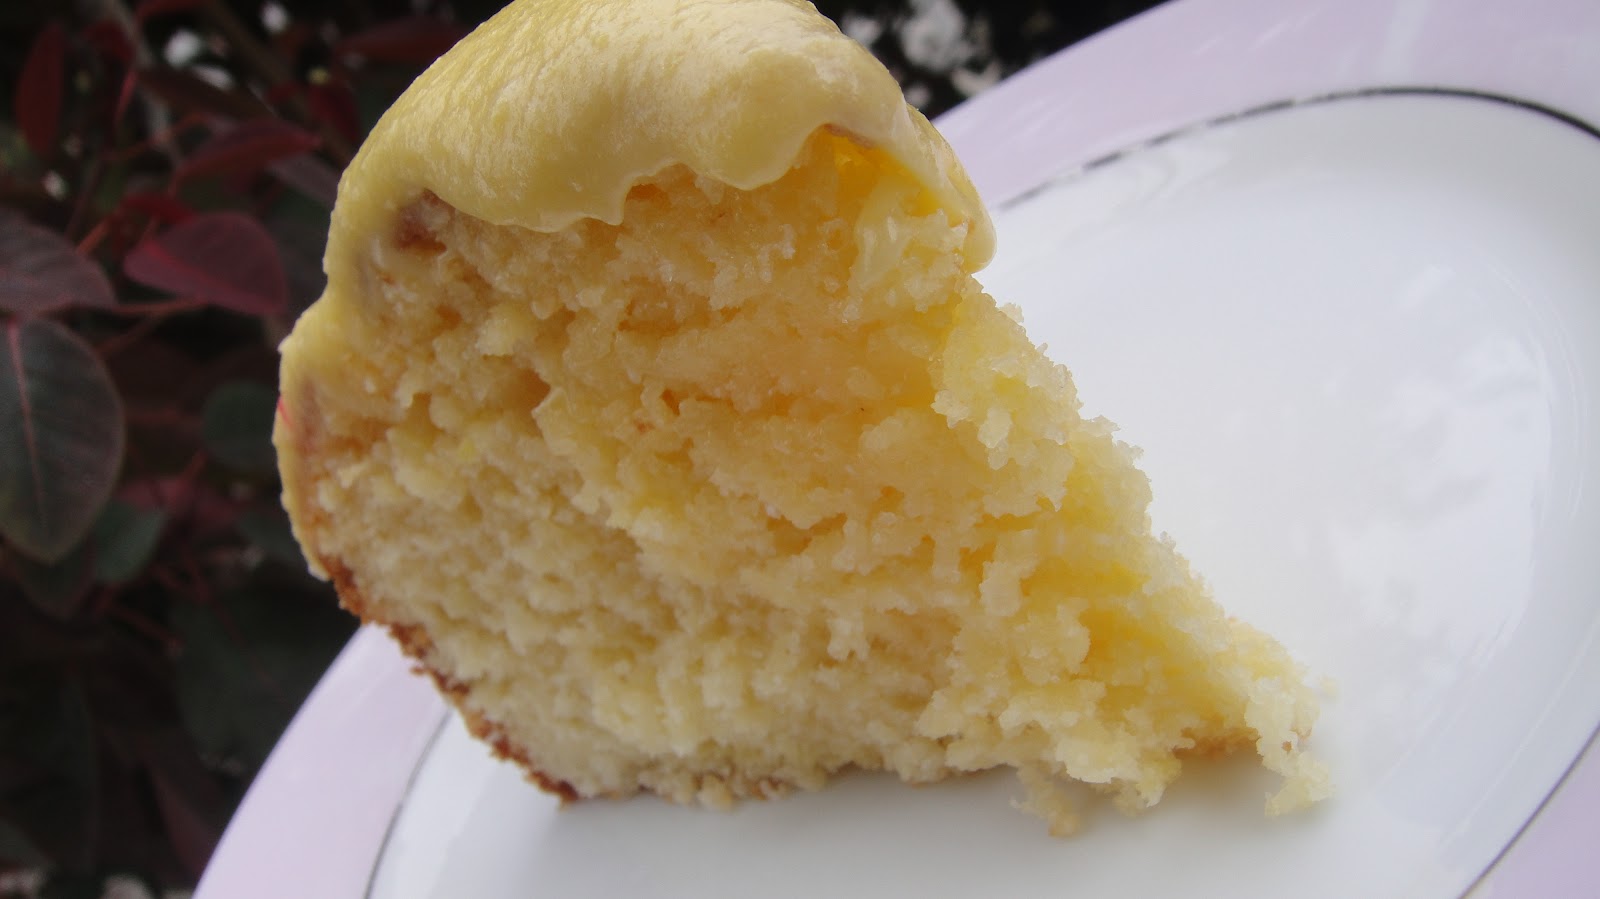 Mums in the Kitchen: Lemon Coconut Cake